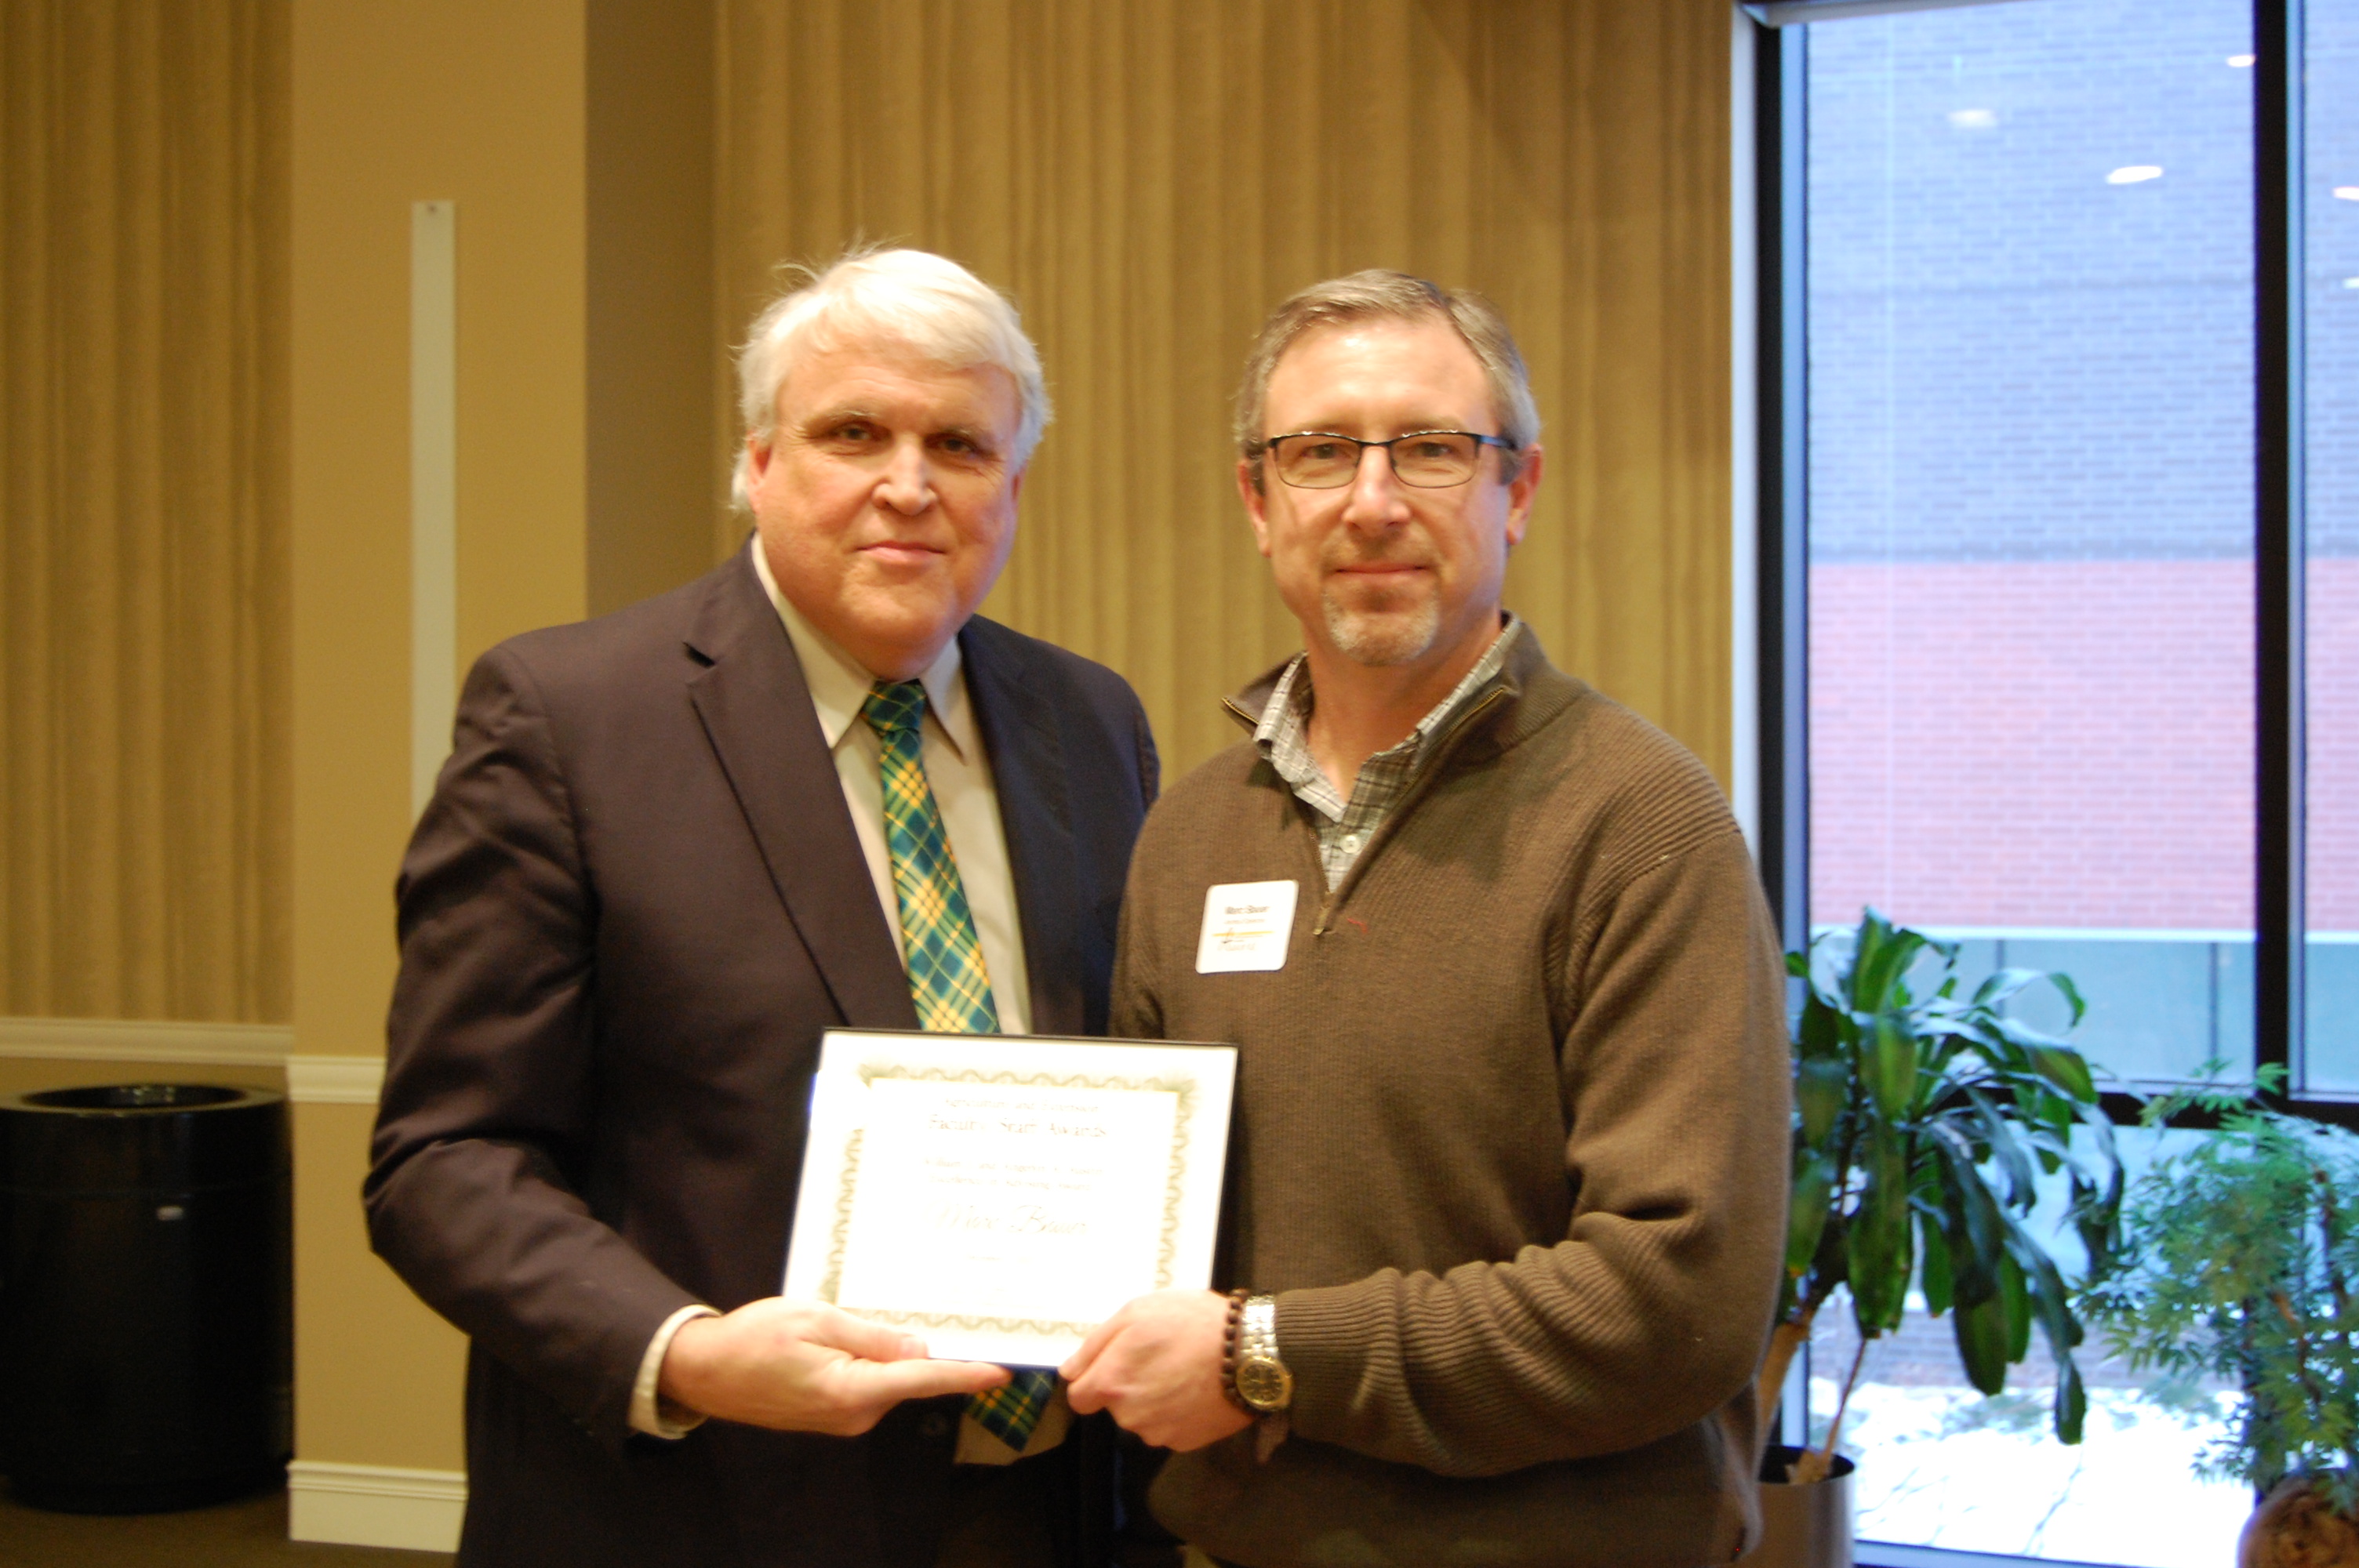 Marc Bauer, right, receives the William J. and Angelyn A. Austin Excellence in Advising Award from David Buchanan, associate dean for academic programs. (NDSU photo)